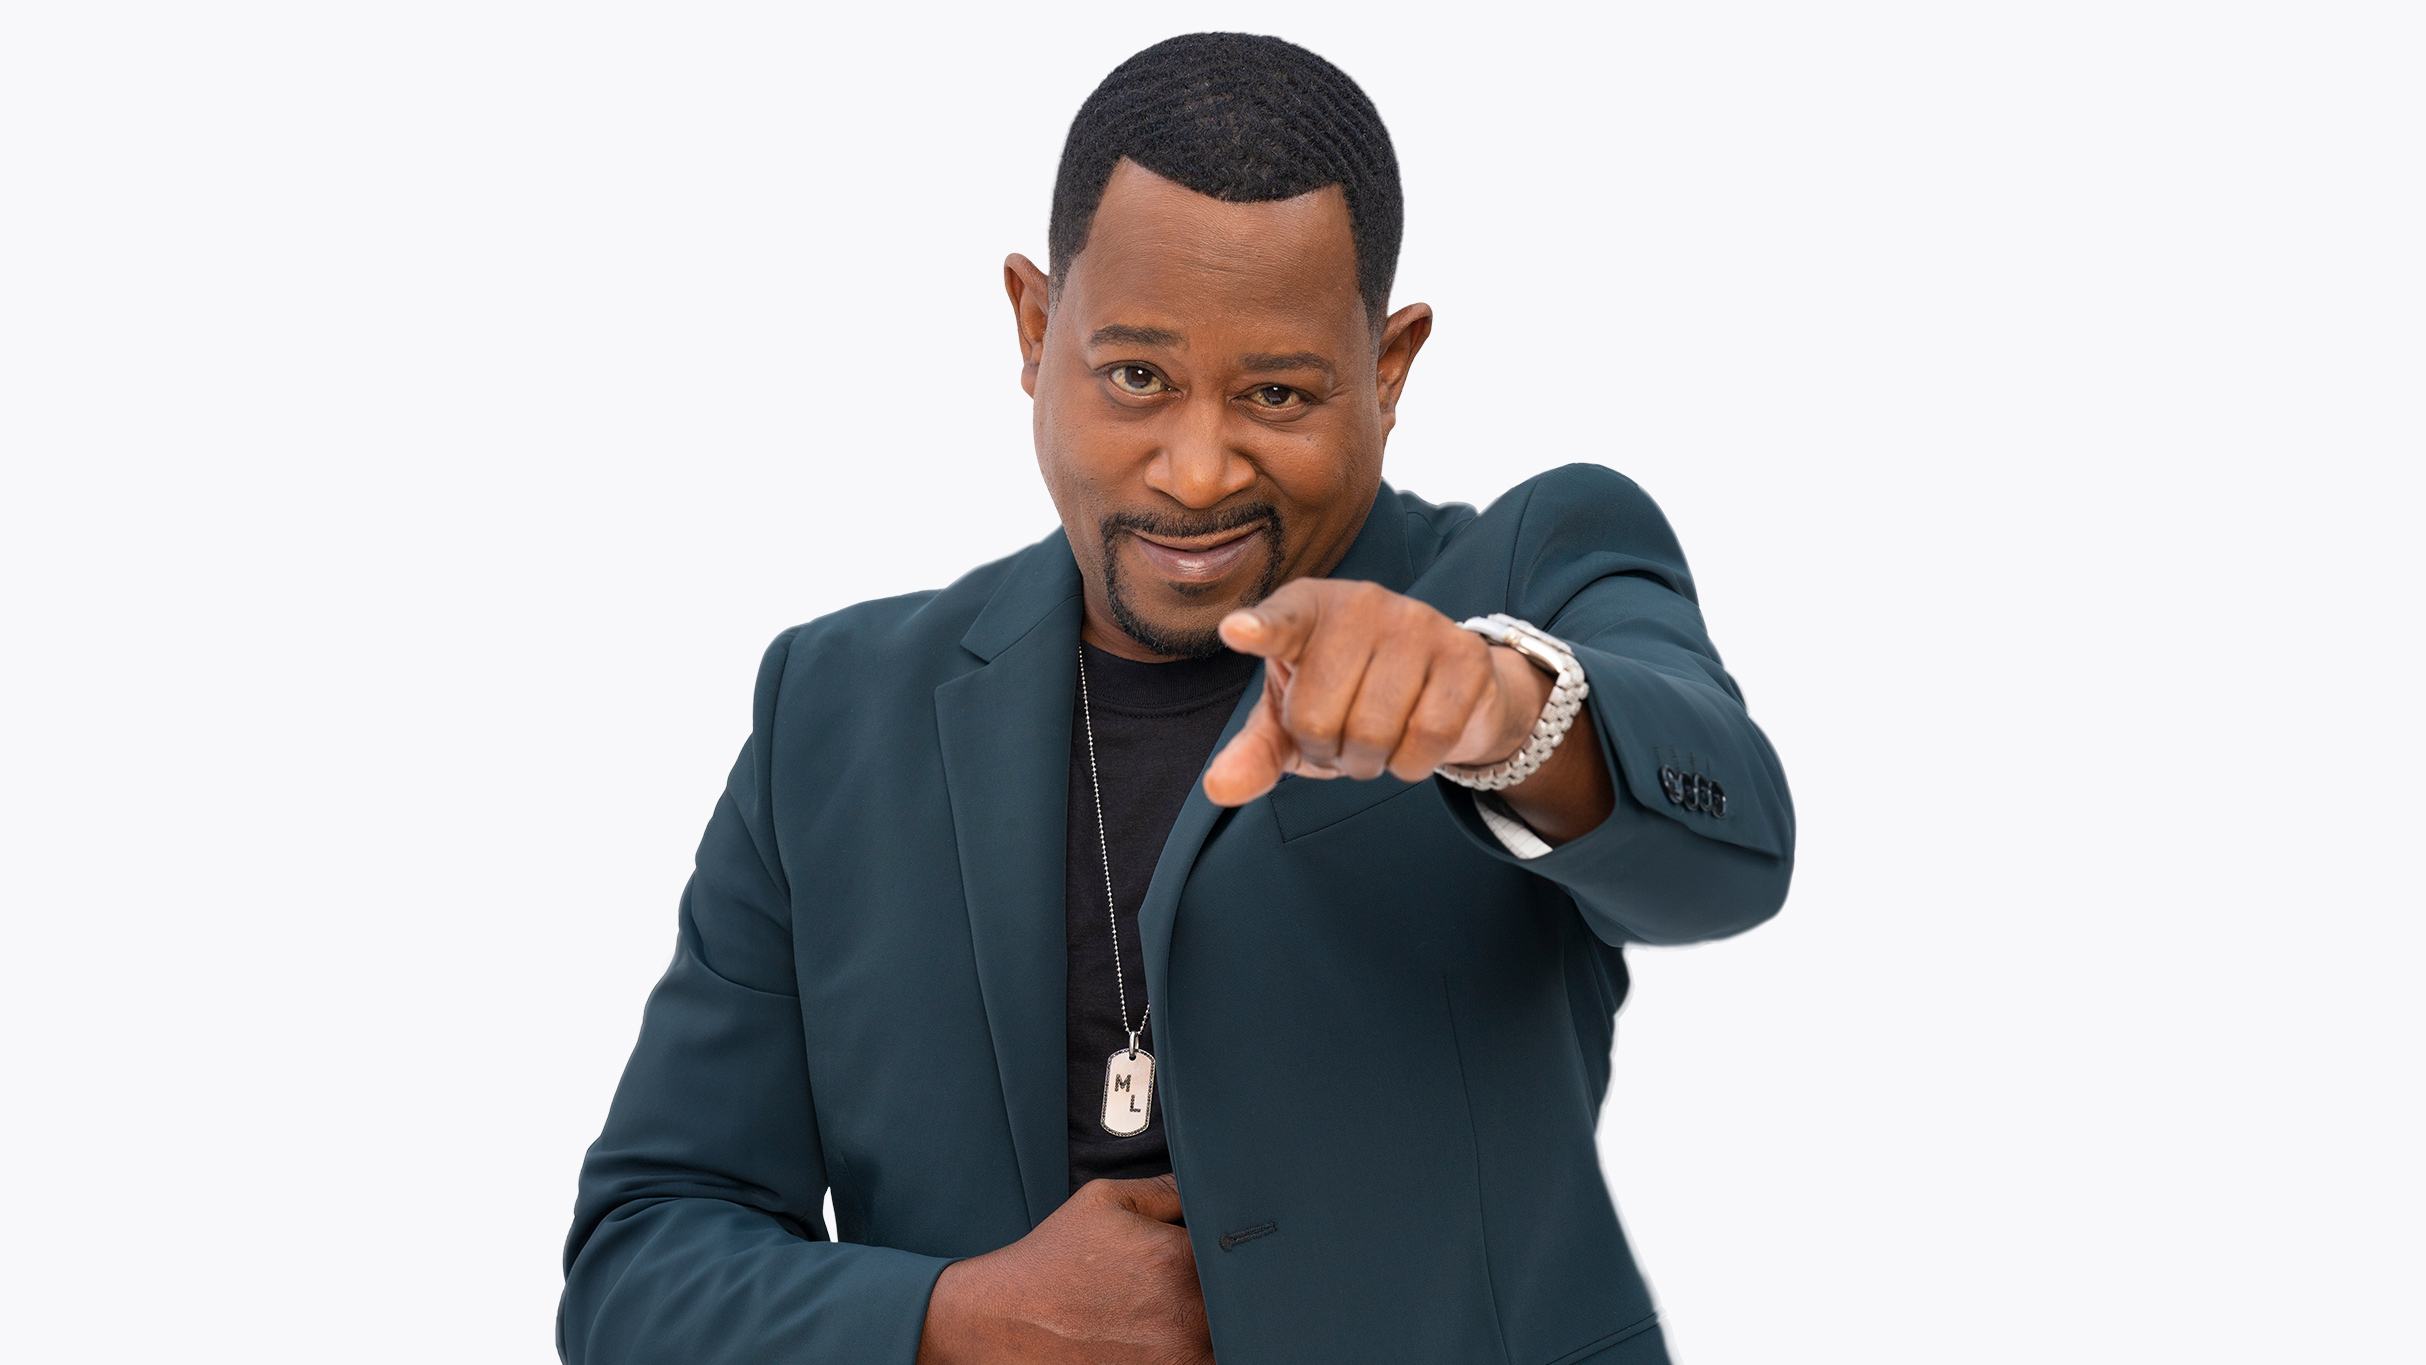 Martin Lawrence with special guest Rickey Smiley